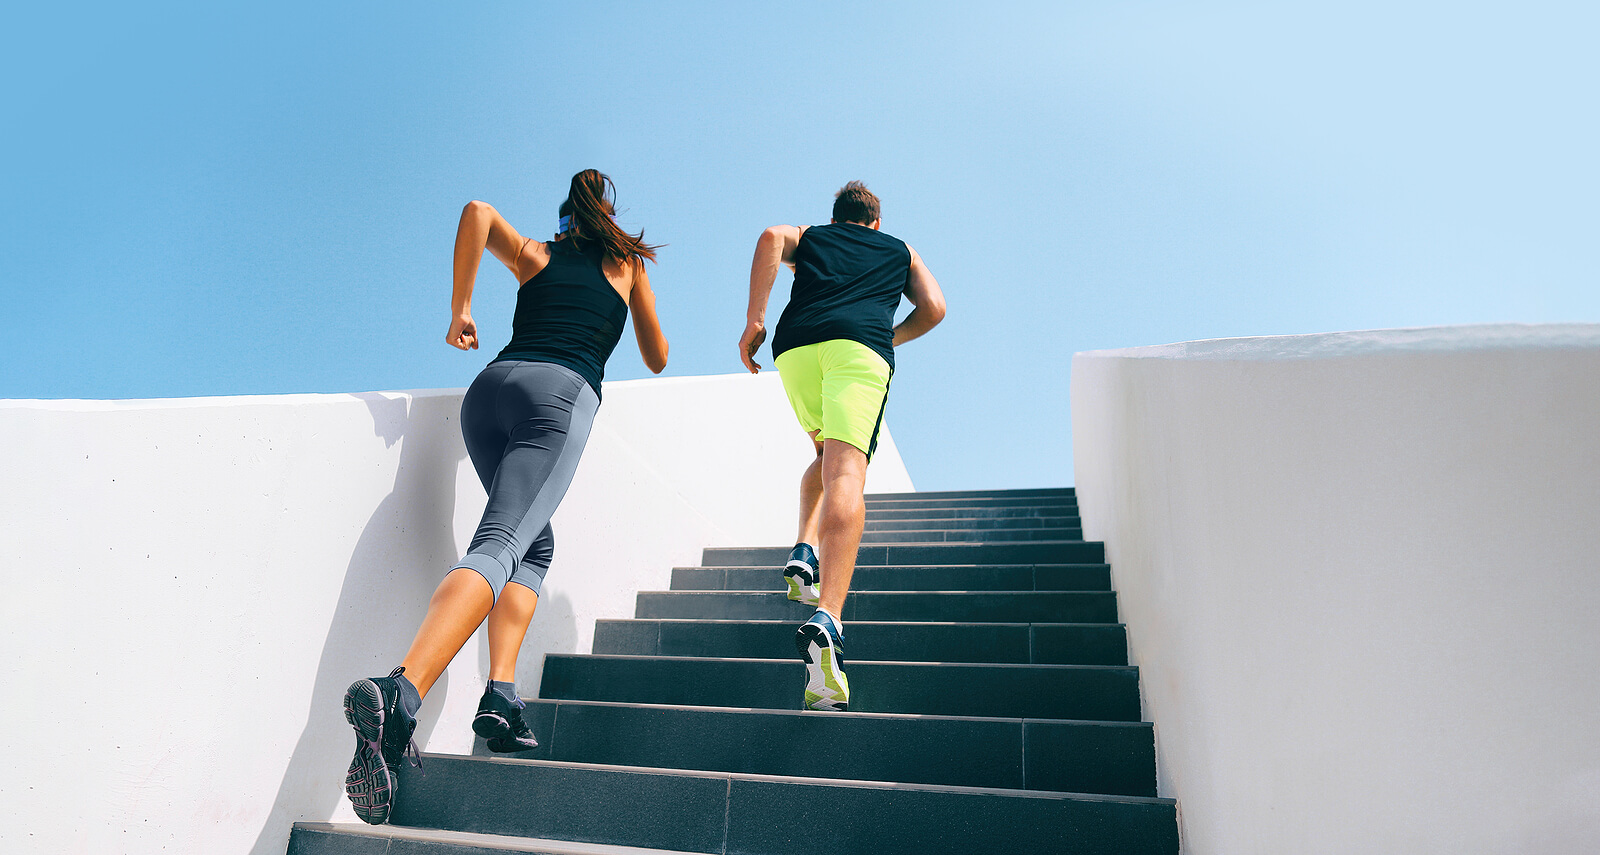 Stairs runners running up staircase training hiit workout. Coupl